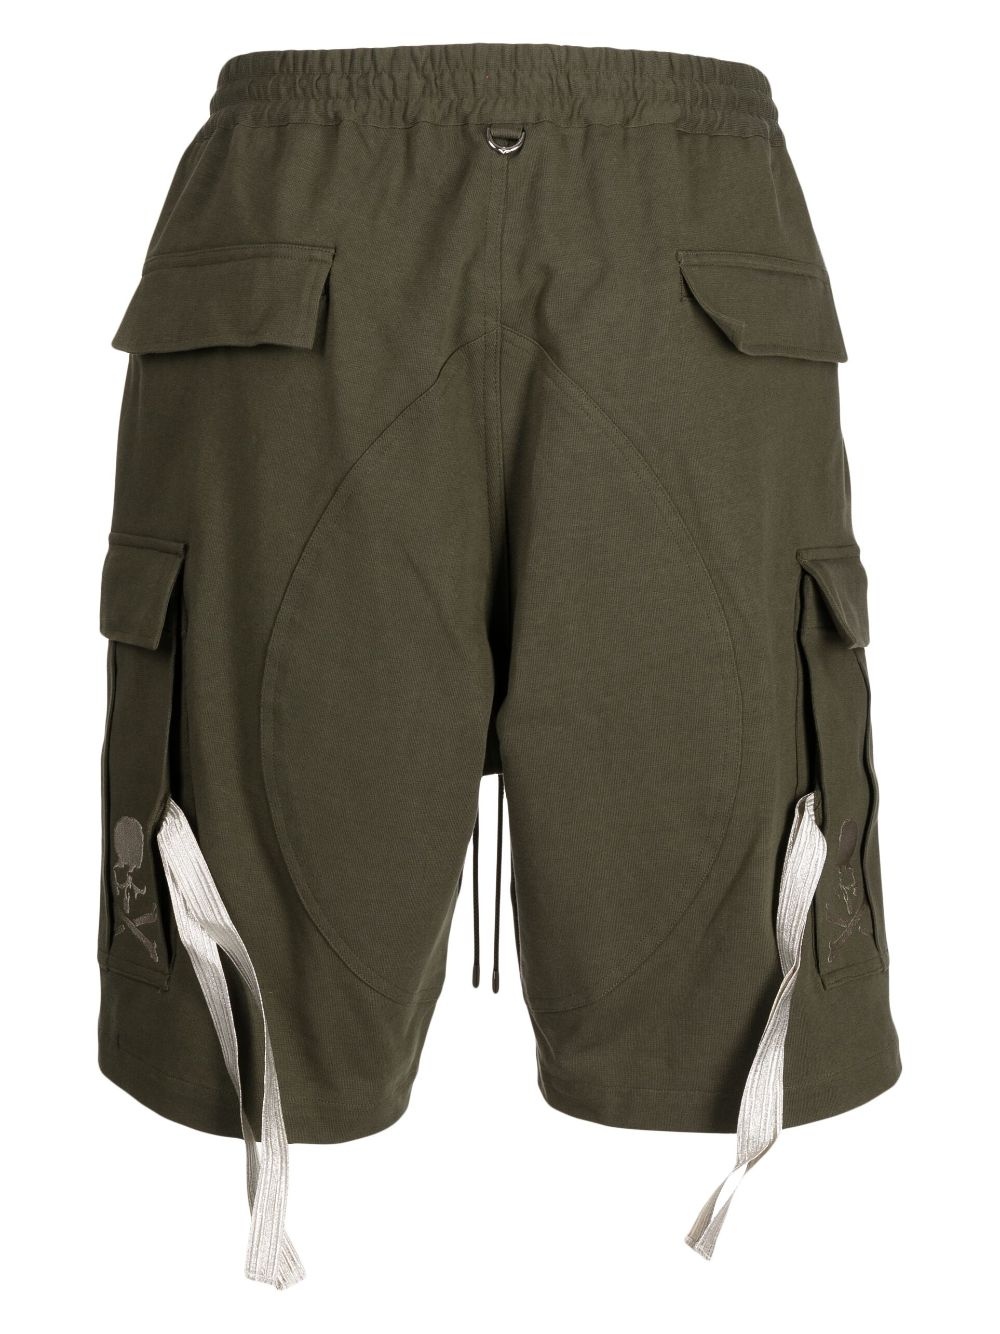 skull-embroidered cargo shorts - 2